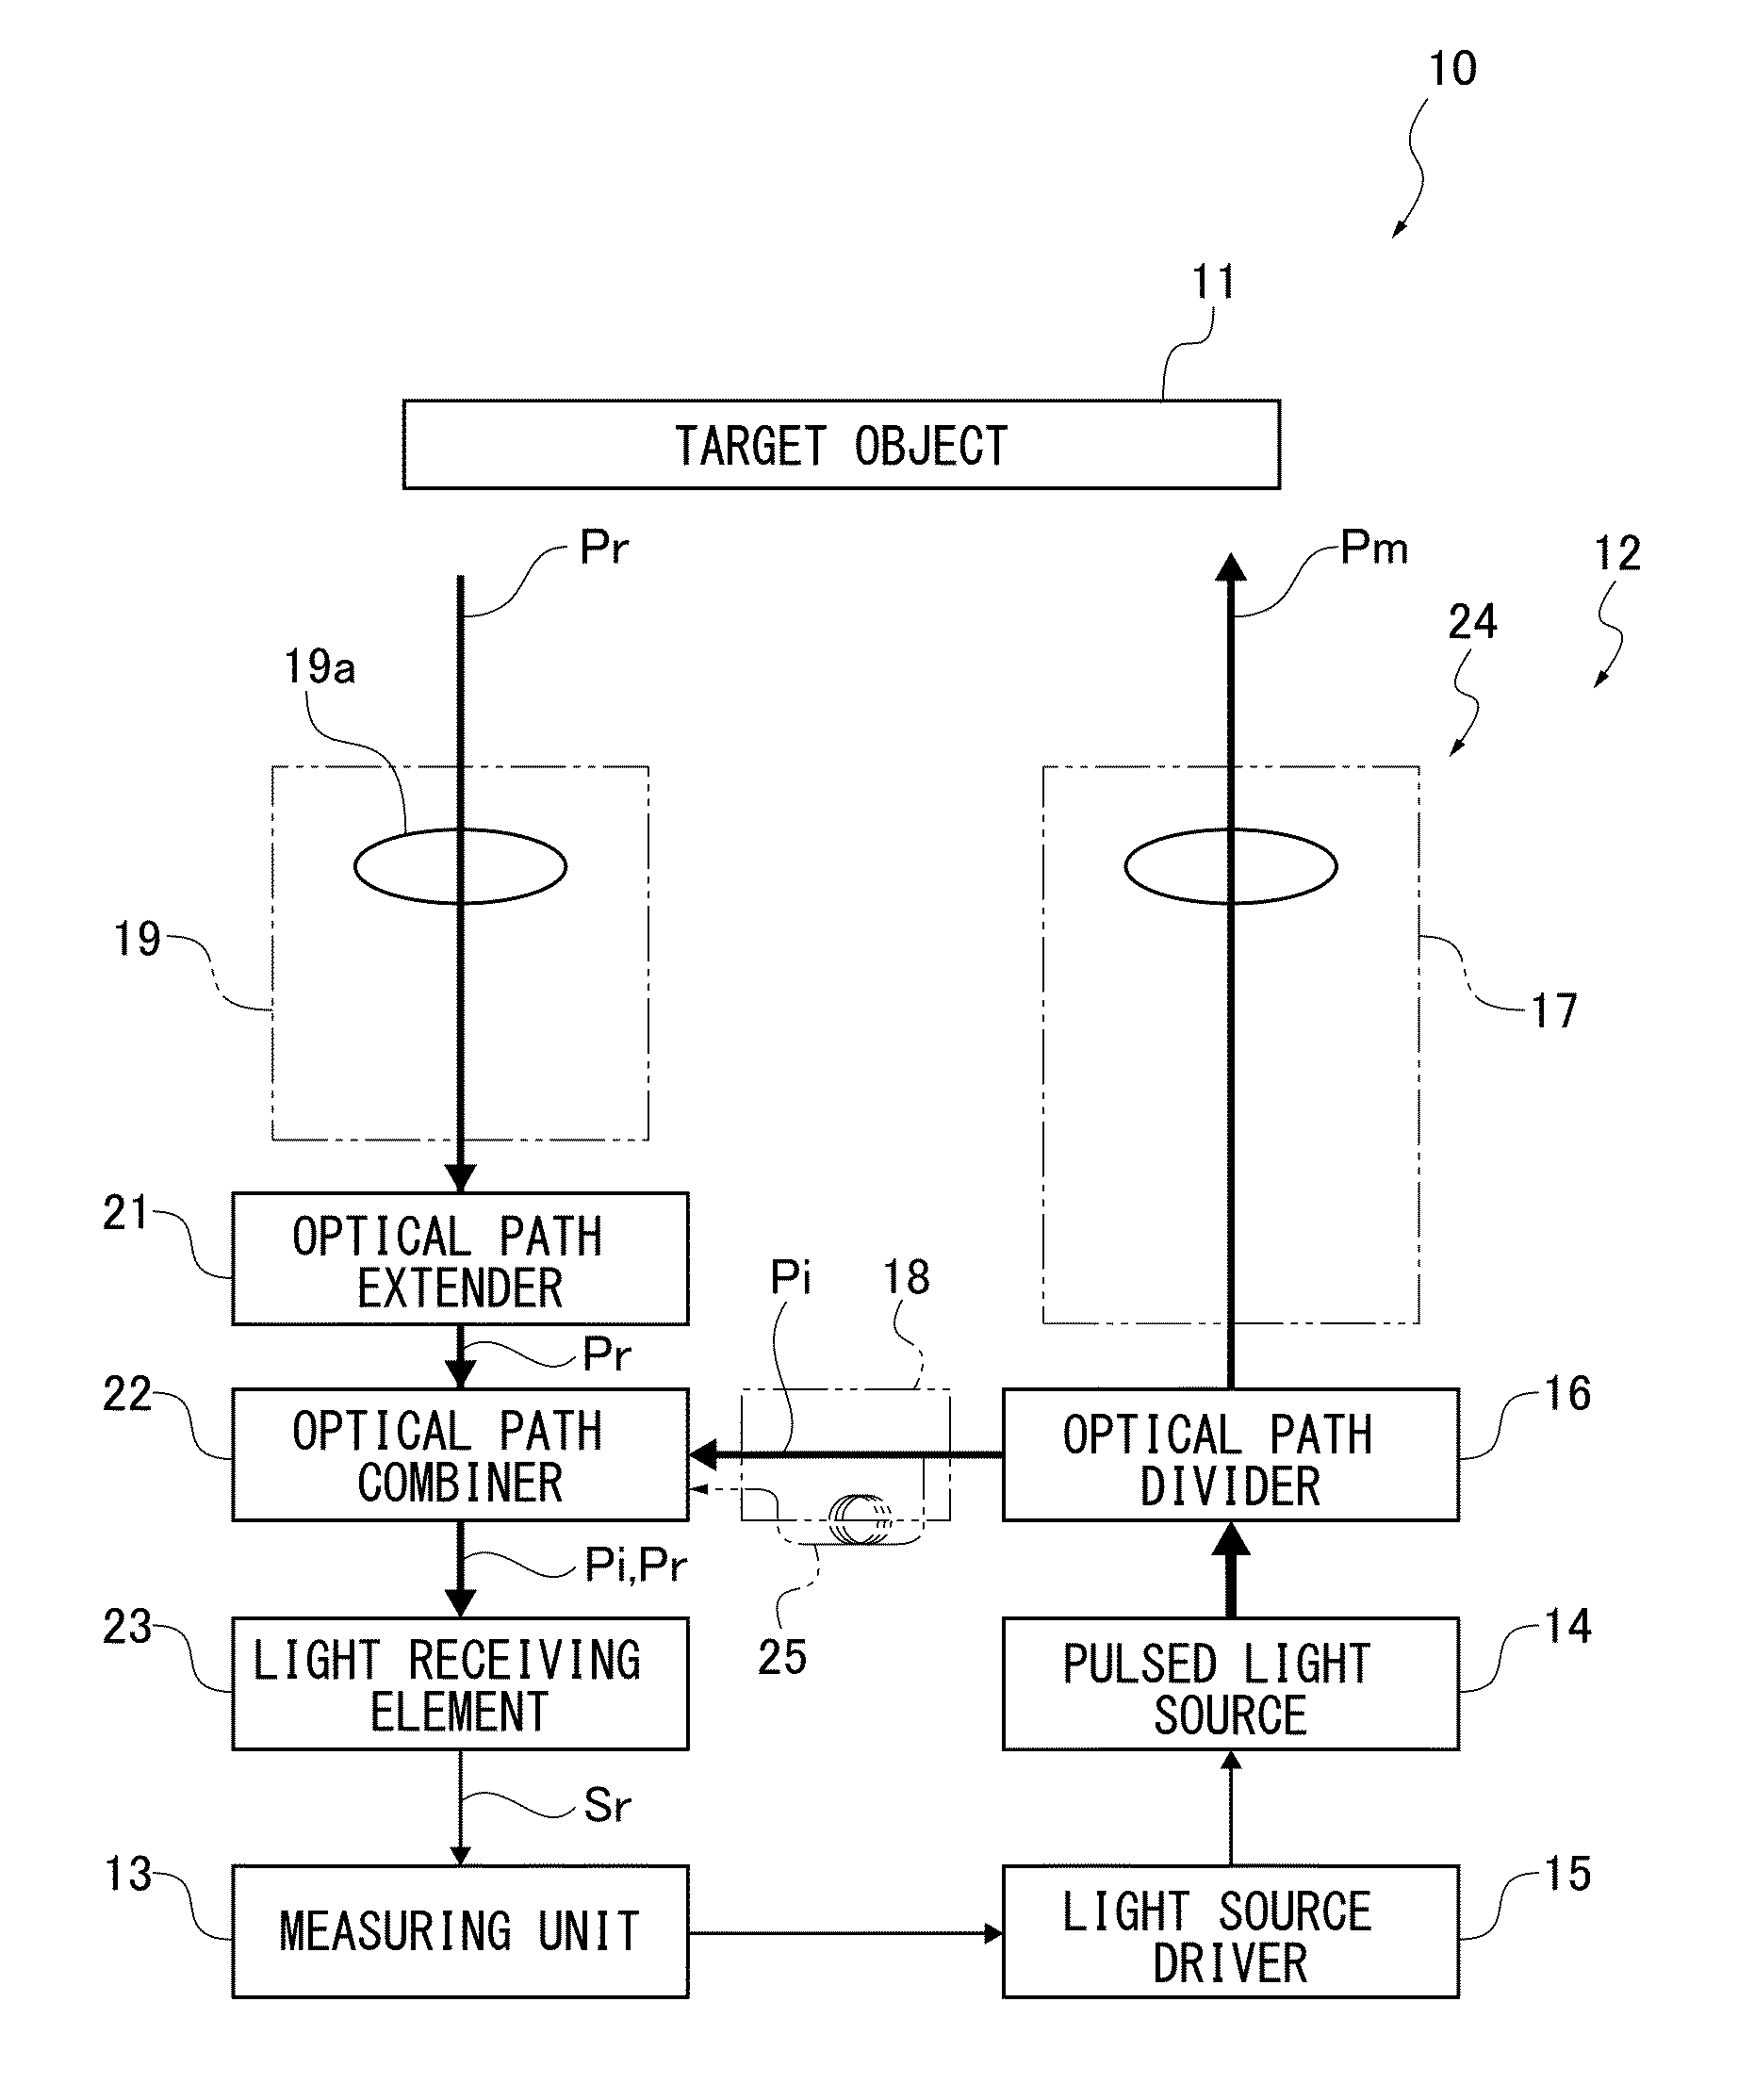 Electronic distance meter